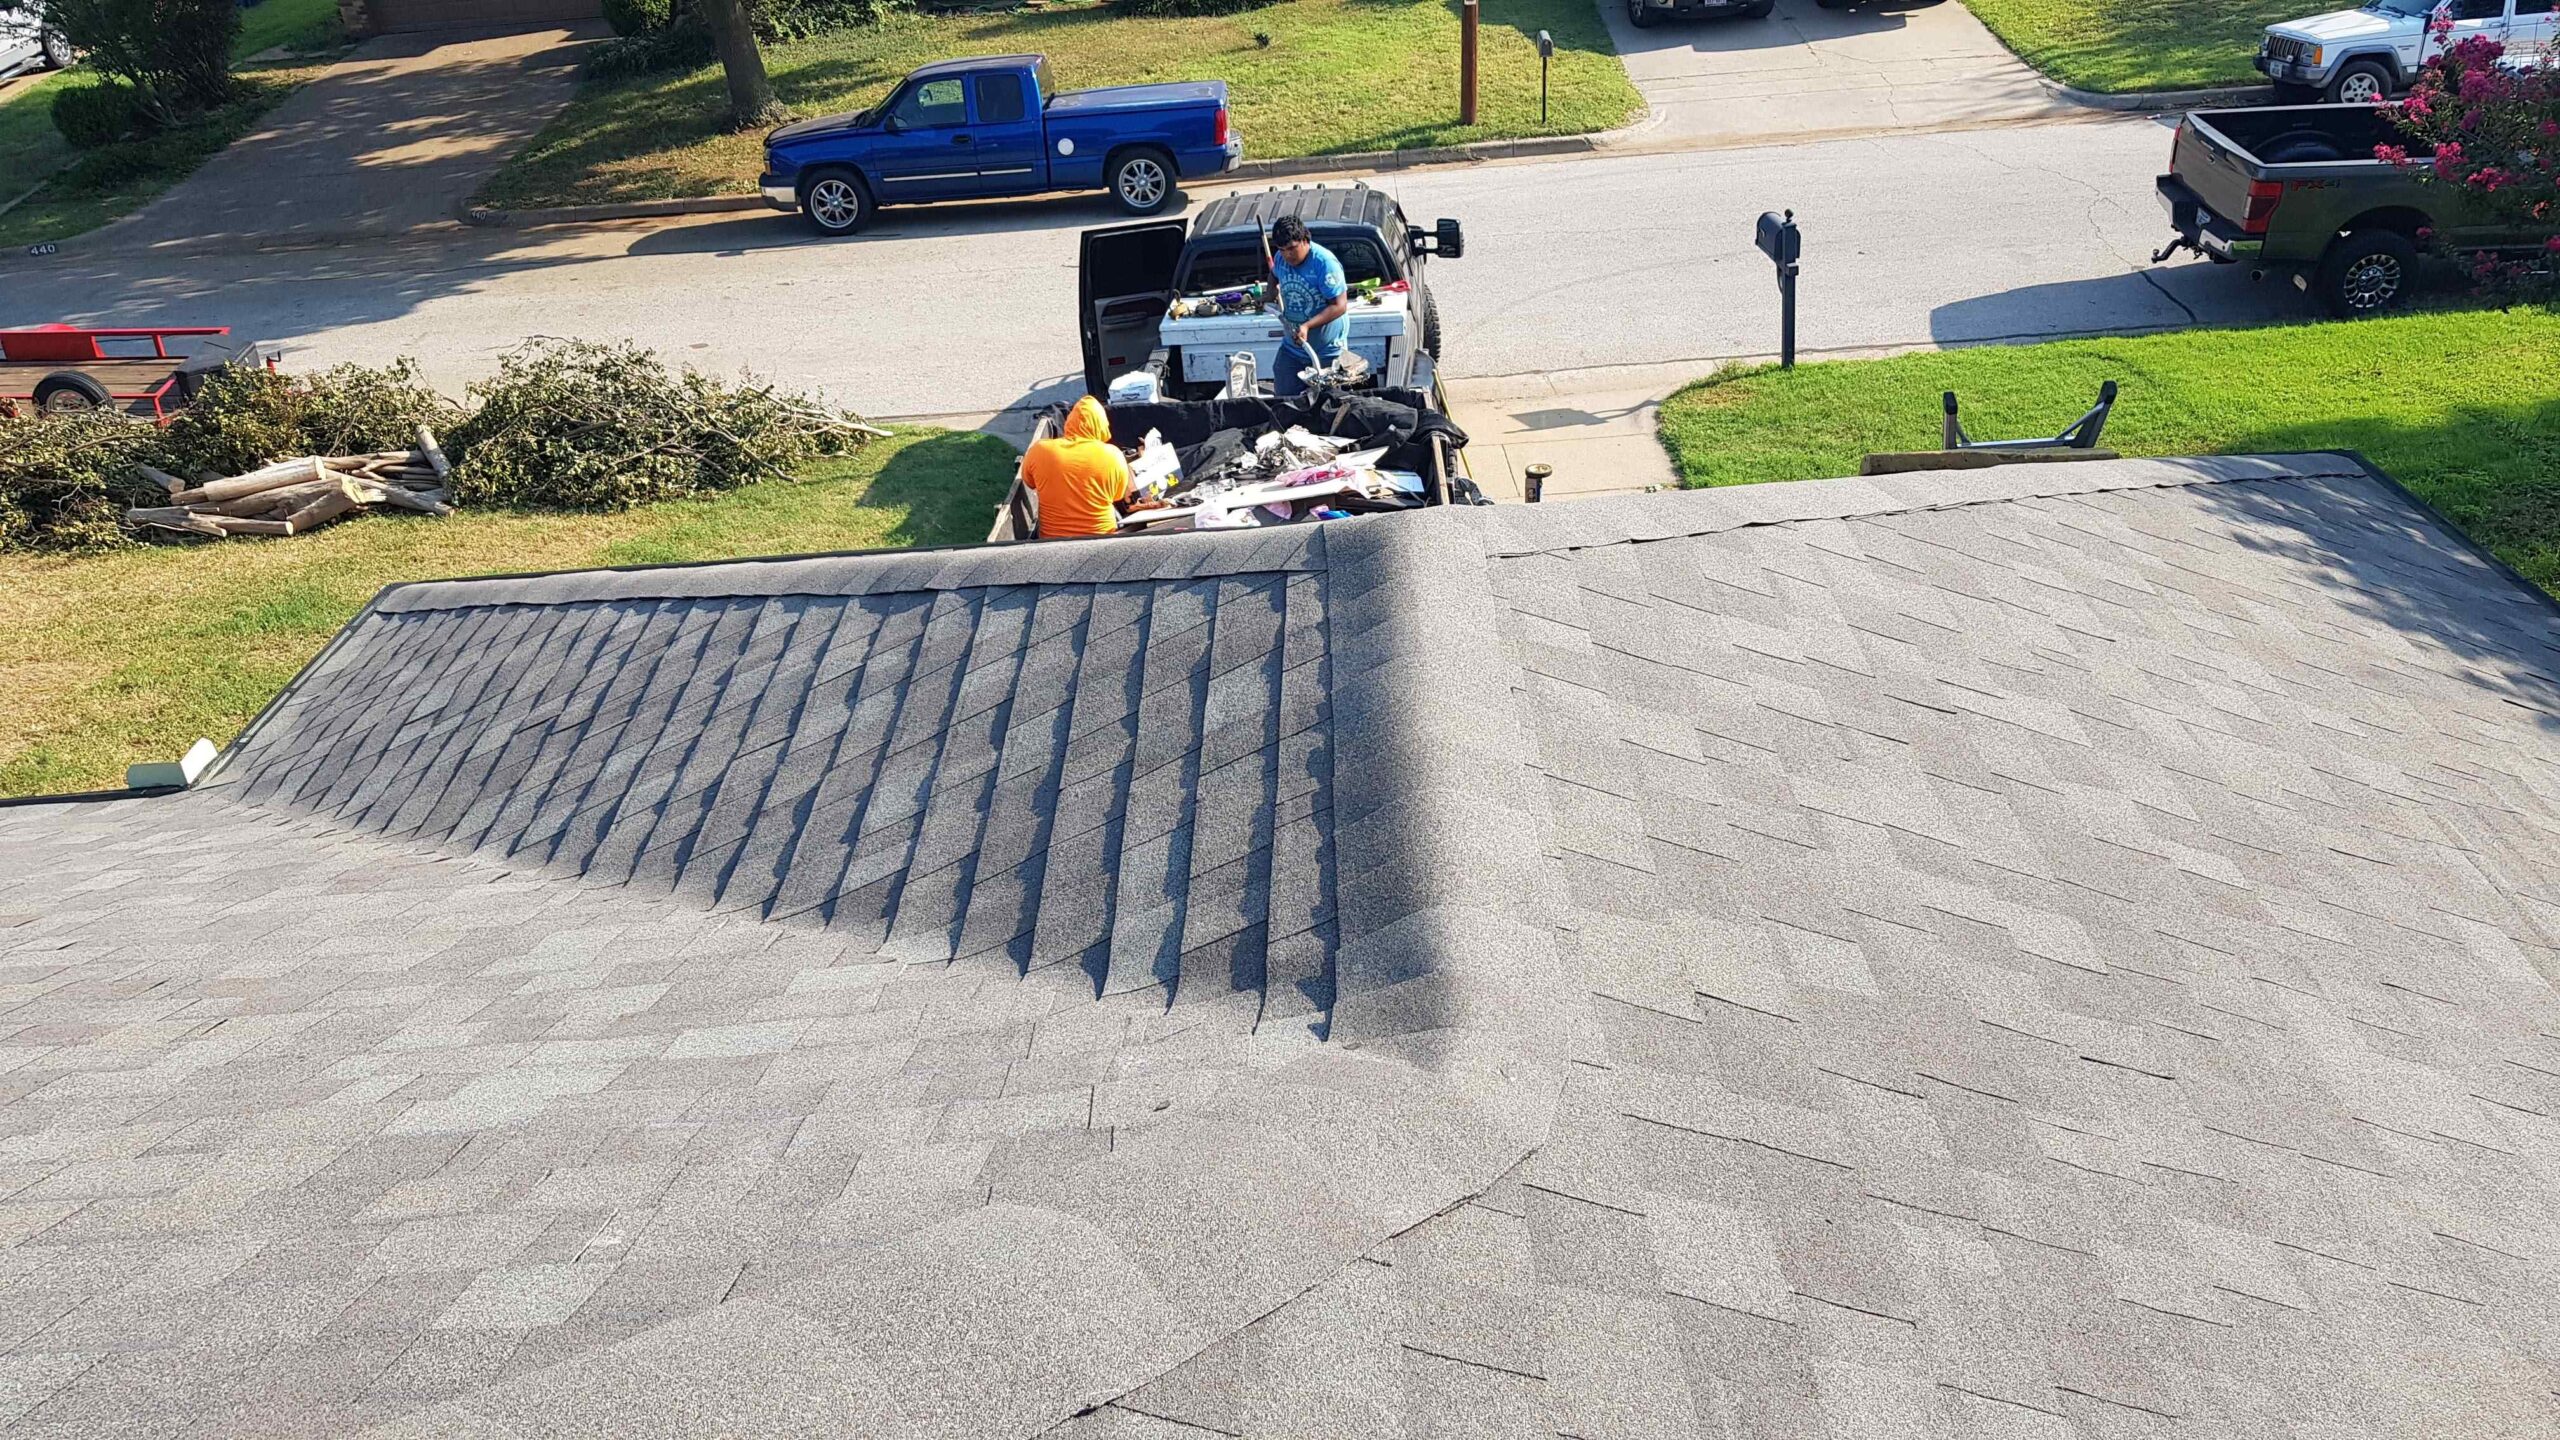 Roofing services in Top Roofing Contractor in the Dallas/Fort Worth Area